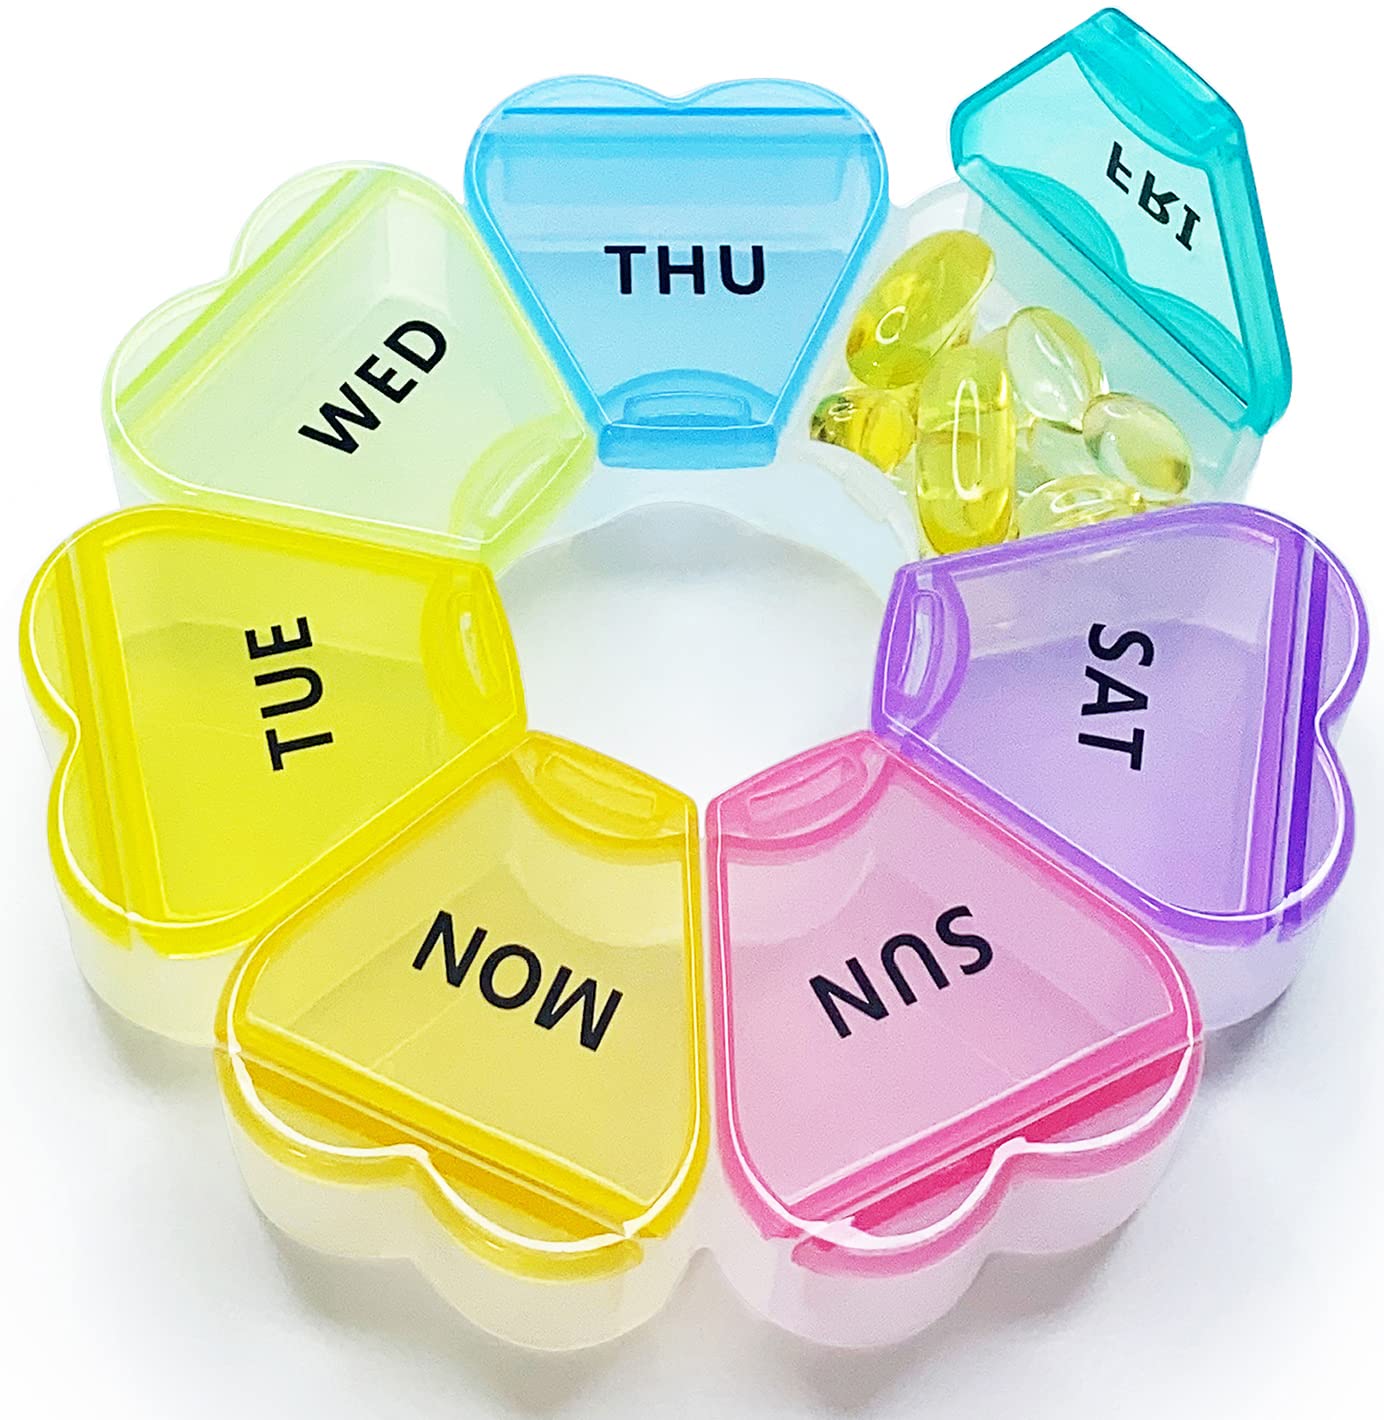 Travel Weekly Pill Organizer, Colorwing Stylish Pretty Pill Box 7 Day, Cute  Daily Pill Case Holder to Medication, Supplements, Tablets, Great for